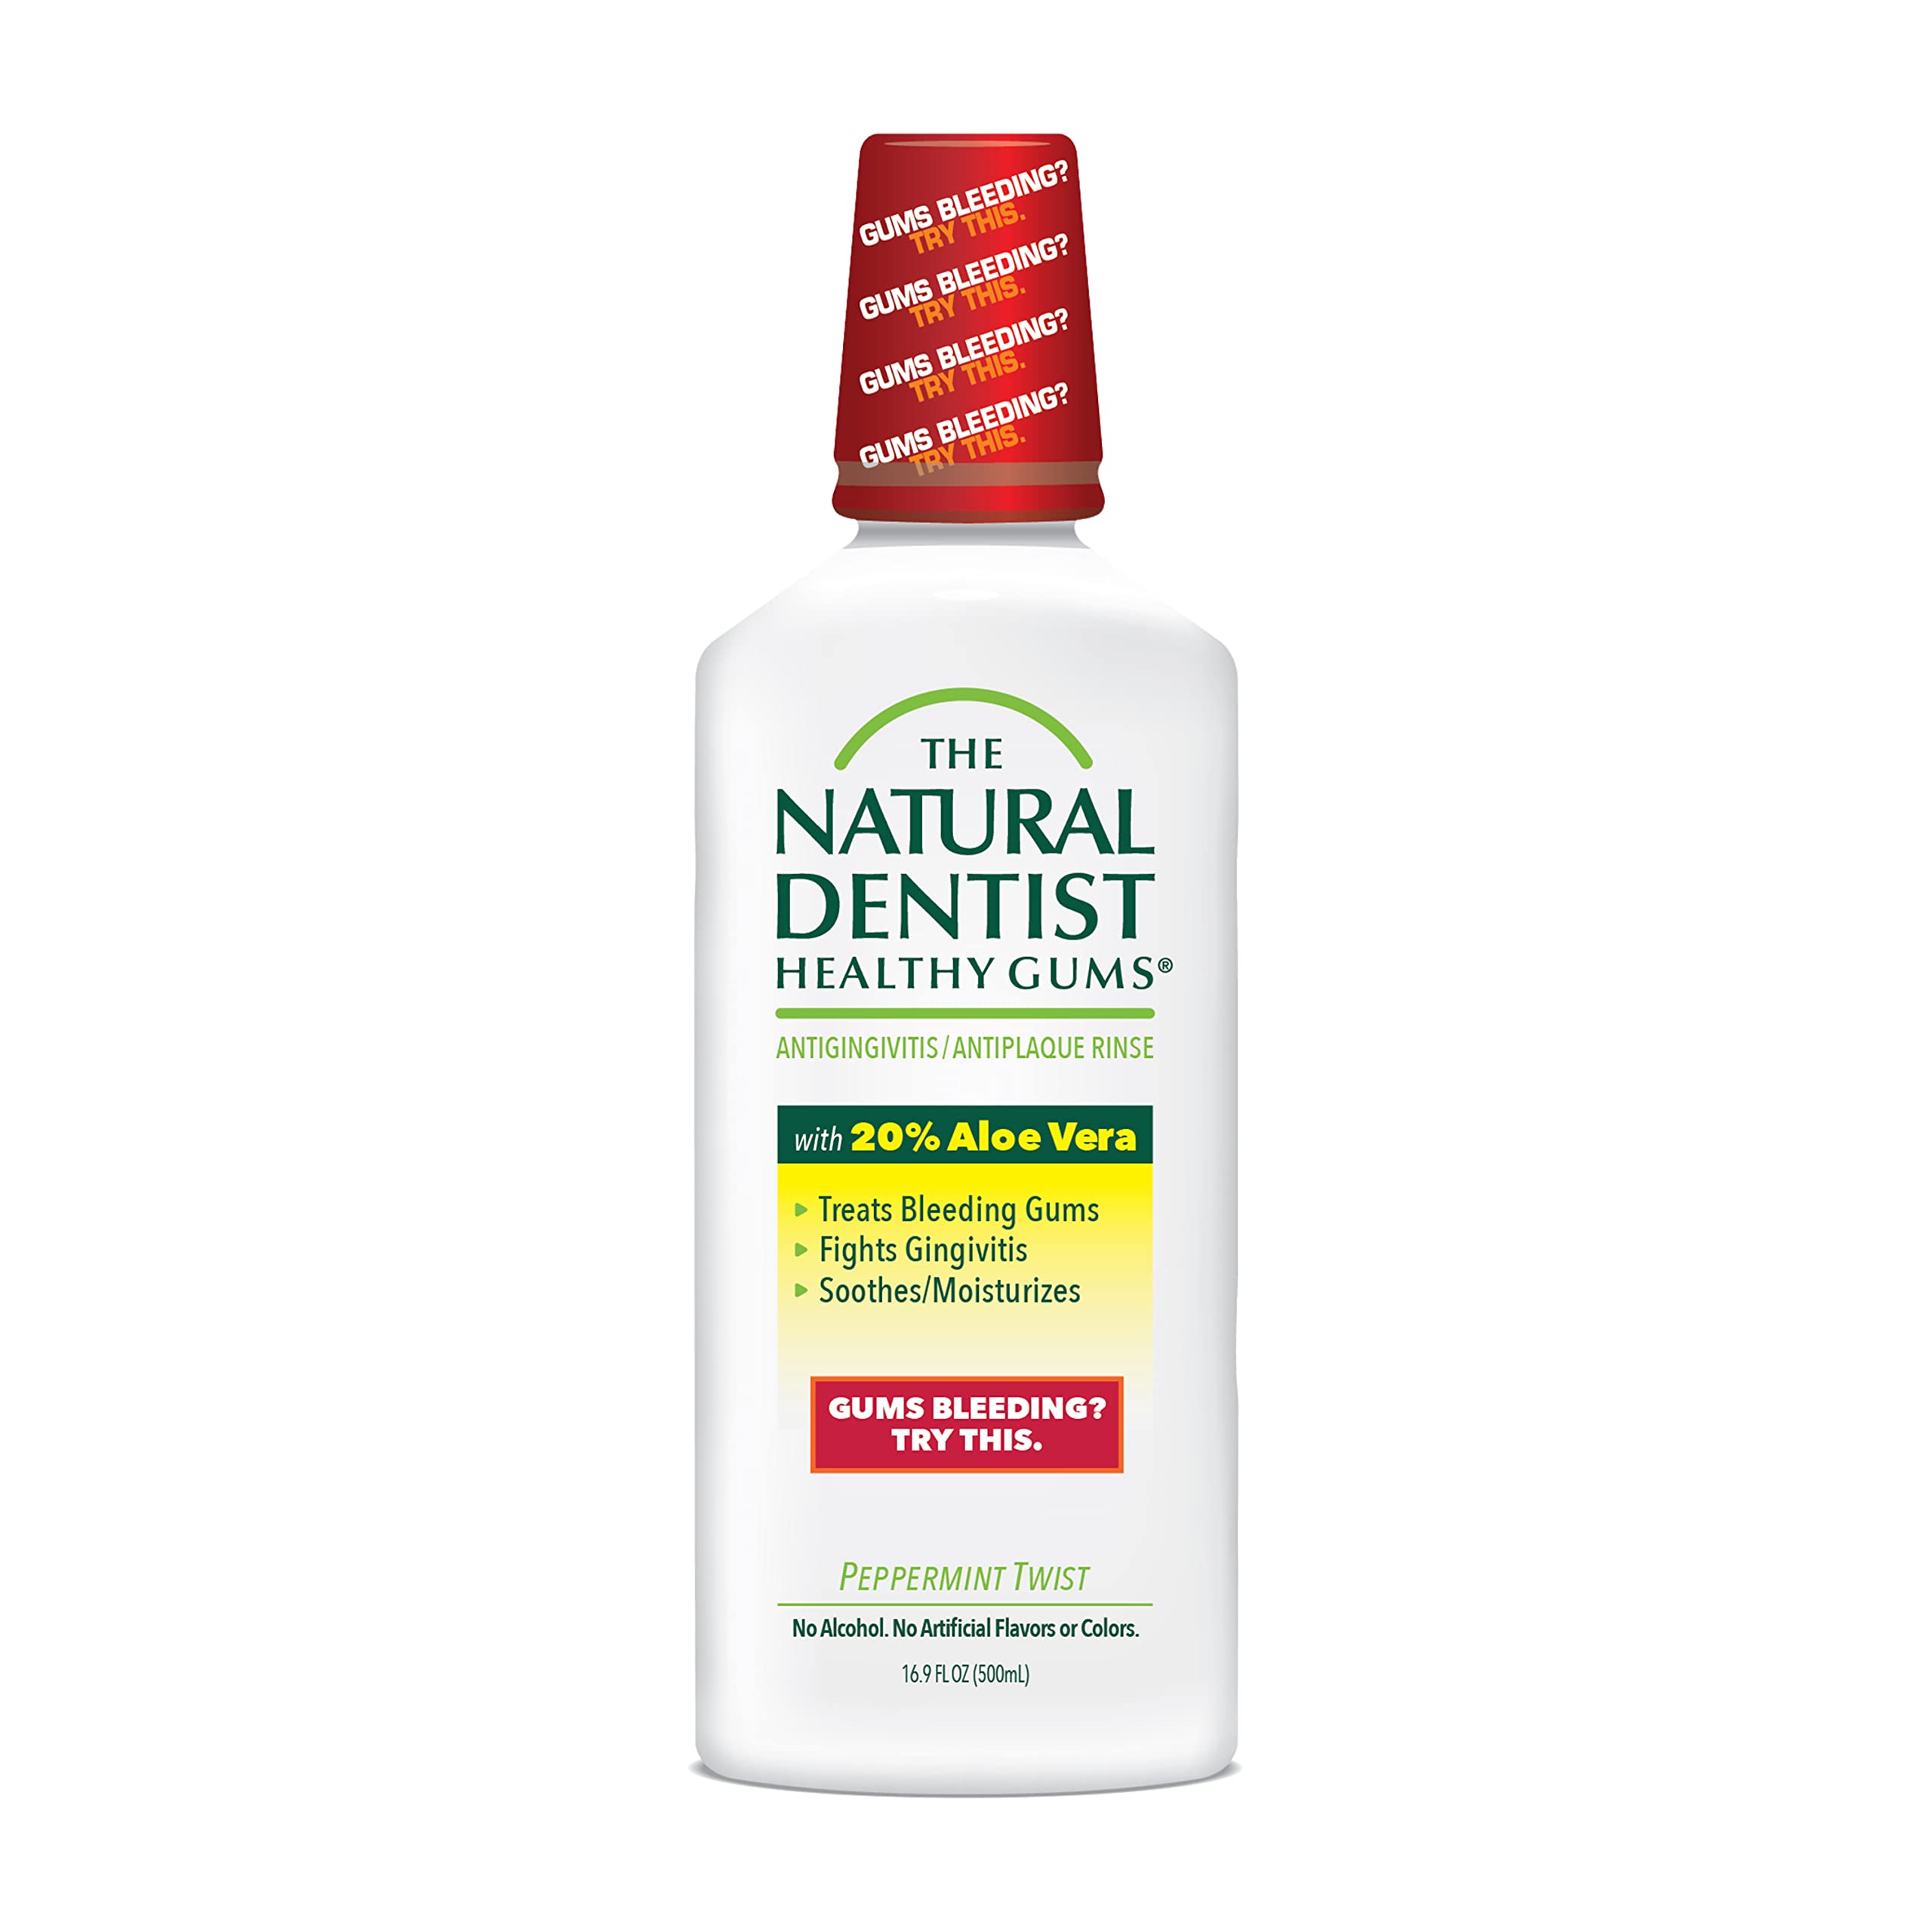 The Natural Dentist Healthy Gums Antigingivitis/Antiplaque Rinse, Adults 12 & Up, Gingivitis Mouthwash, Bleeding Gums Treatment, Safe for Chemotherapy Patients, Aloe Vera, Alcohol-free, 16.9 fl